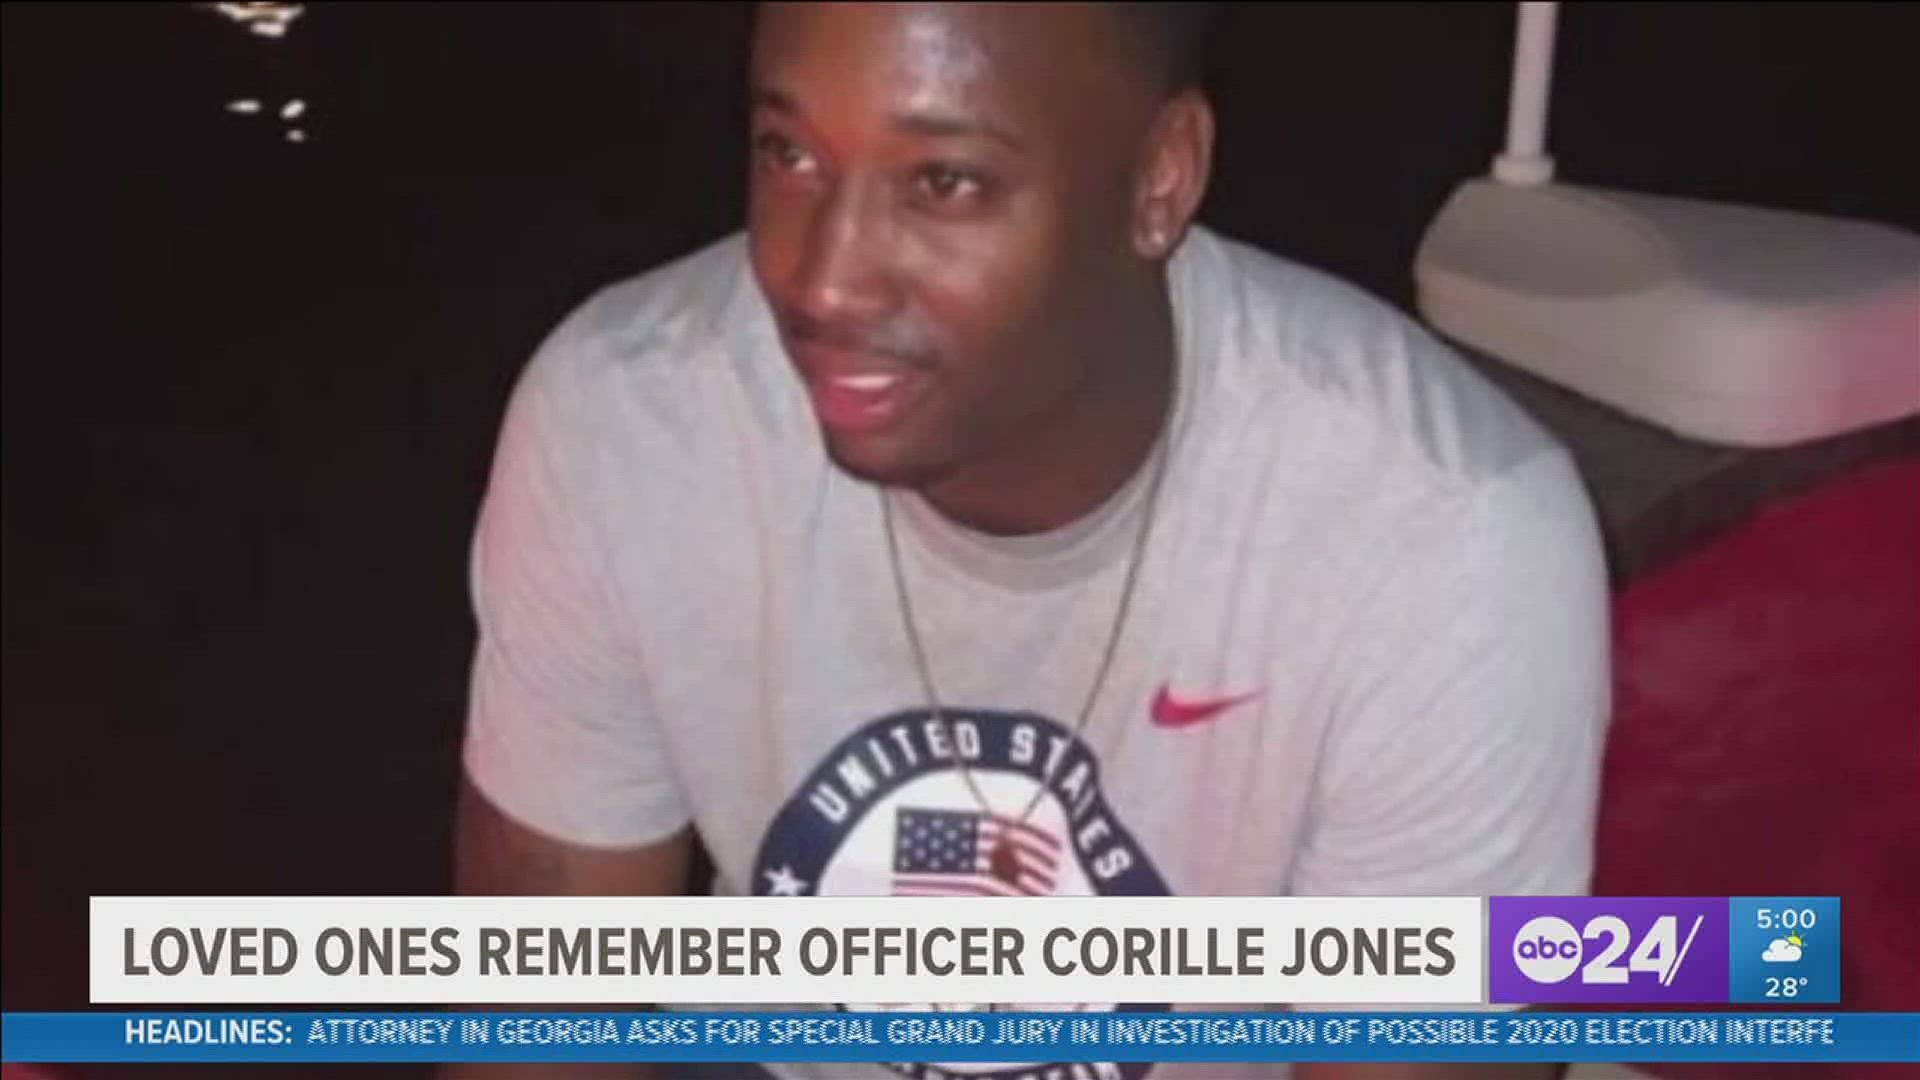 MPD Officer Corille 'CJ' Jones is being remembered as a loving father, a kind soul, and passionate basketball player.